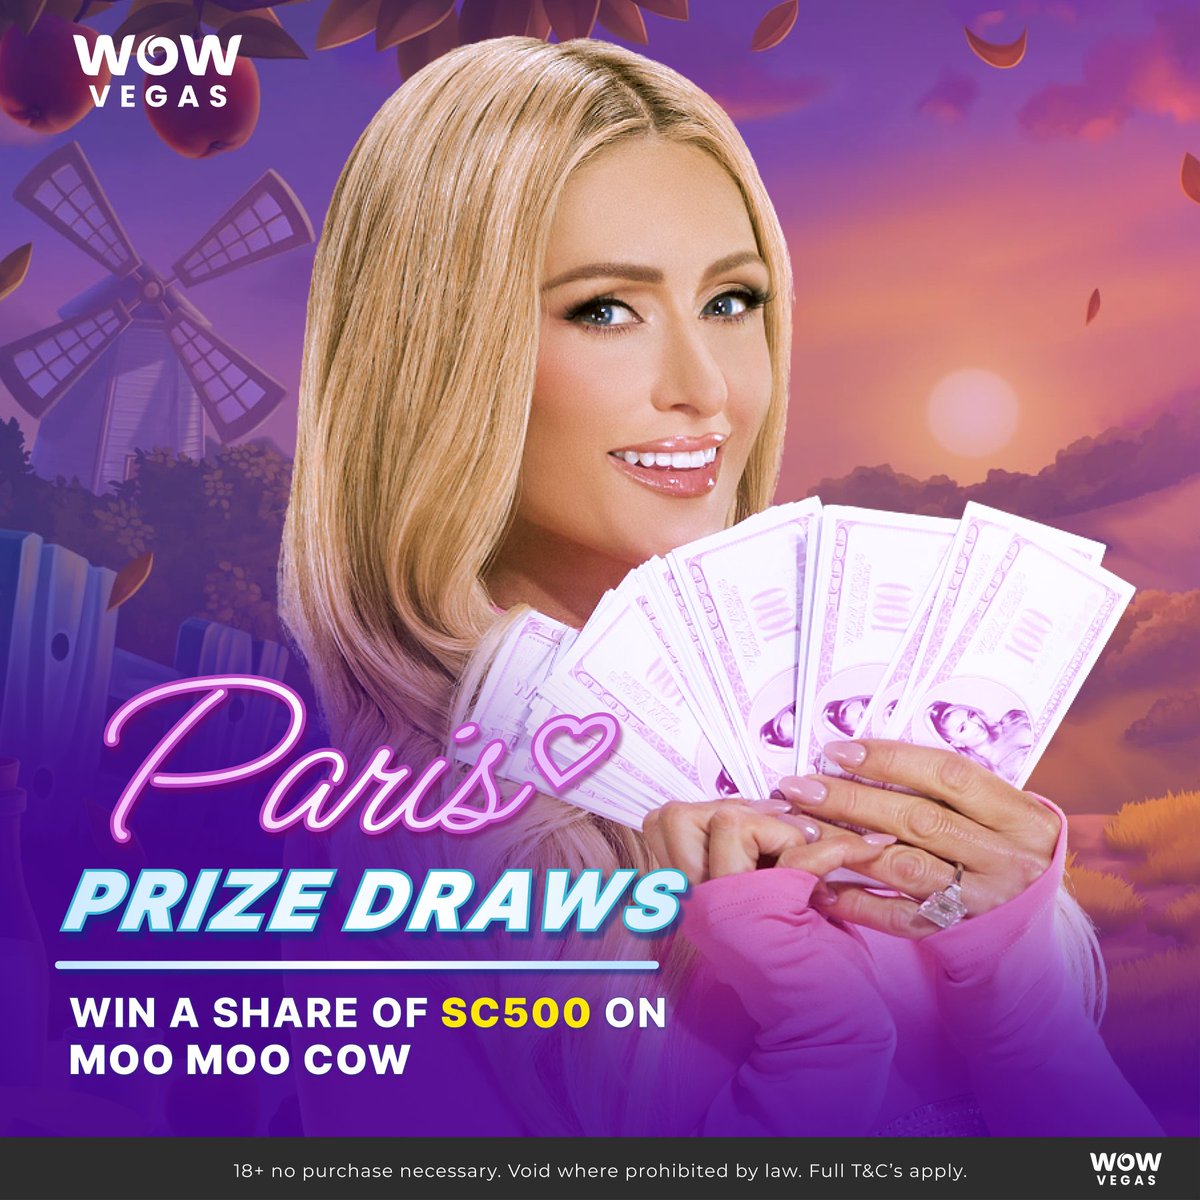 Moo Moo Cow, by Habanero, is now live at WOW Vegas! 👨🏼‍🌾🐮 Don't miss out – play Moo Moo Cow with SC before midnight tonight to enter our Paris Prize Draw! You could win a share of SC 500! Double your chances of winning and join the quest for fortune! 🏆💰